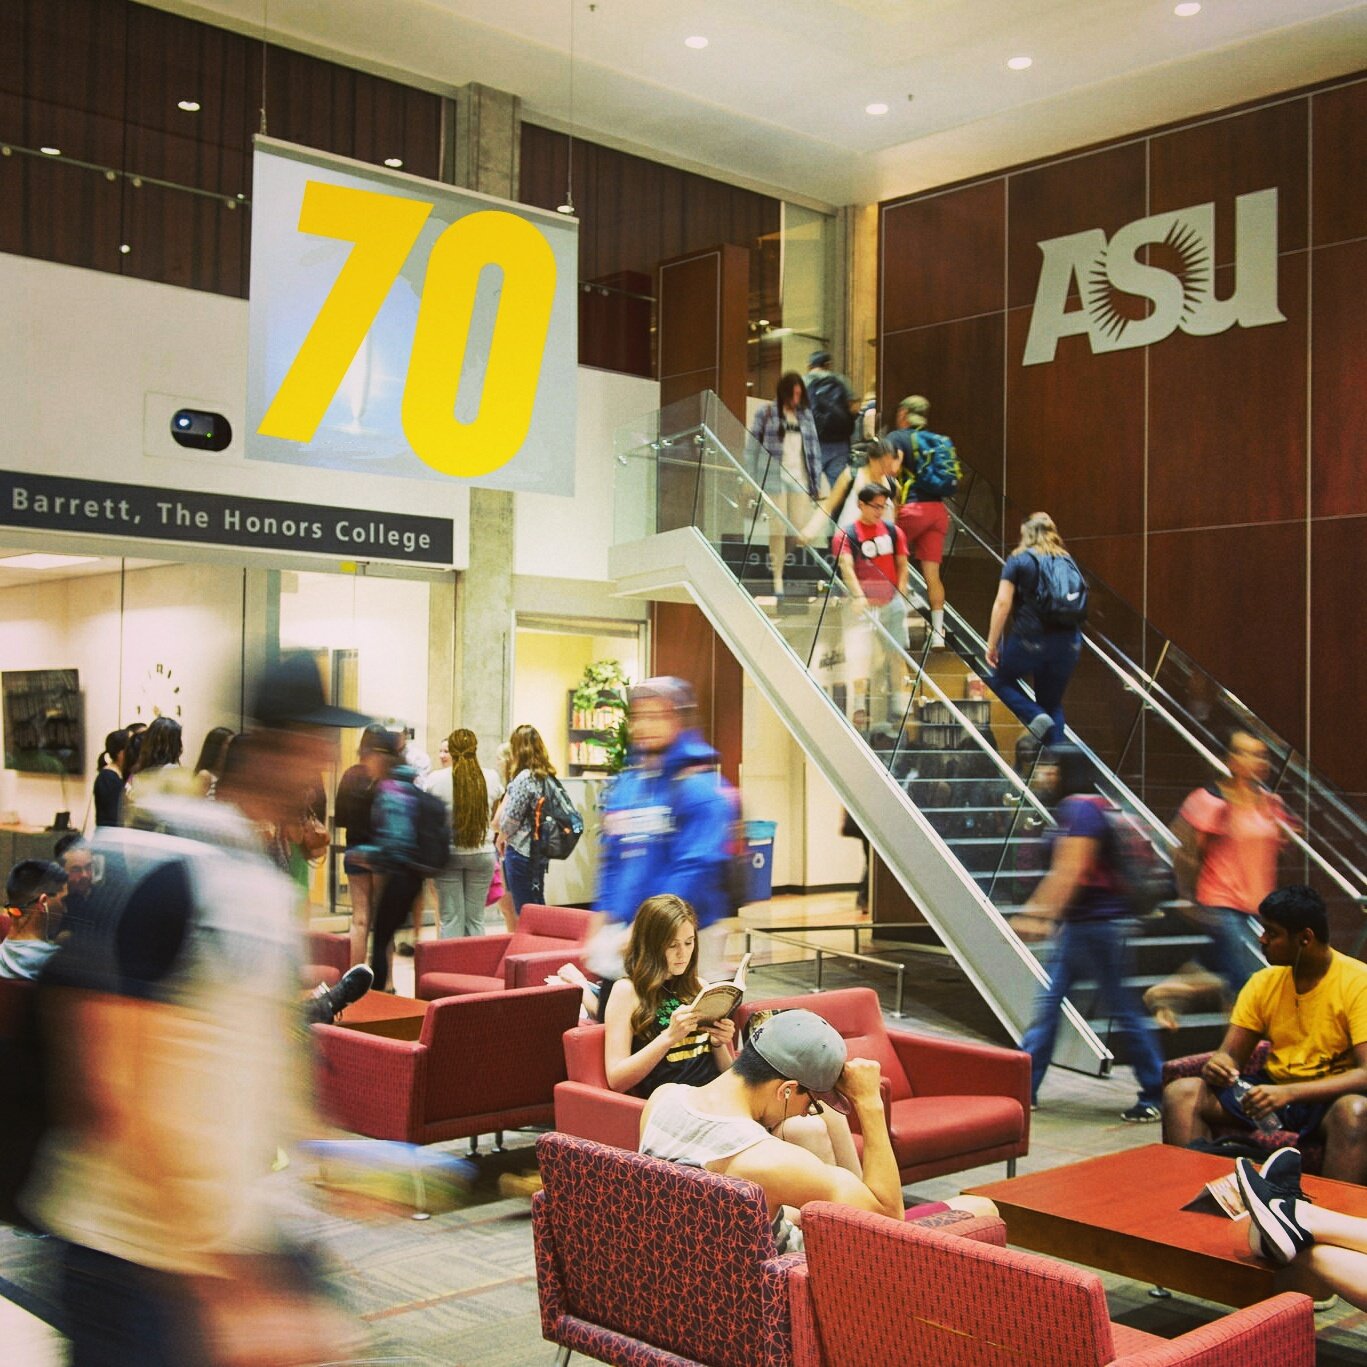 ASU Admissions on Twitter "The countdown continues to the start of the